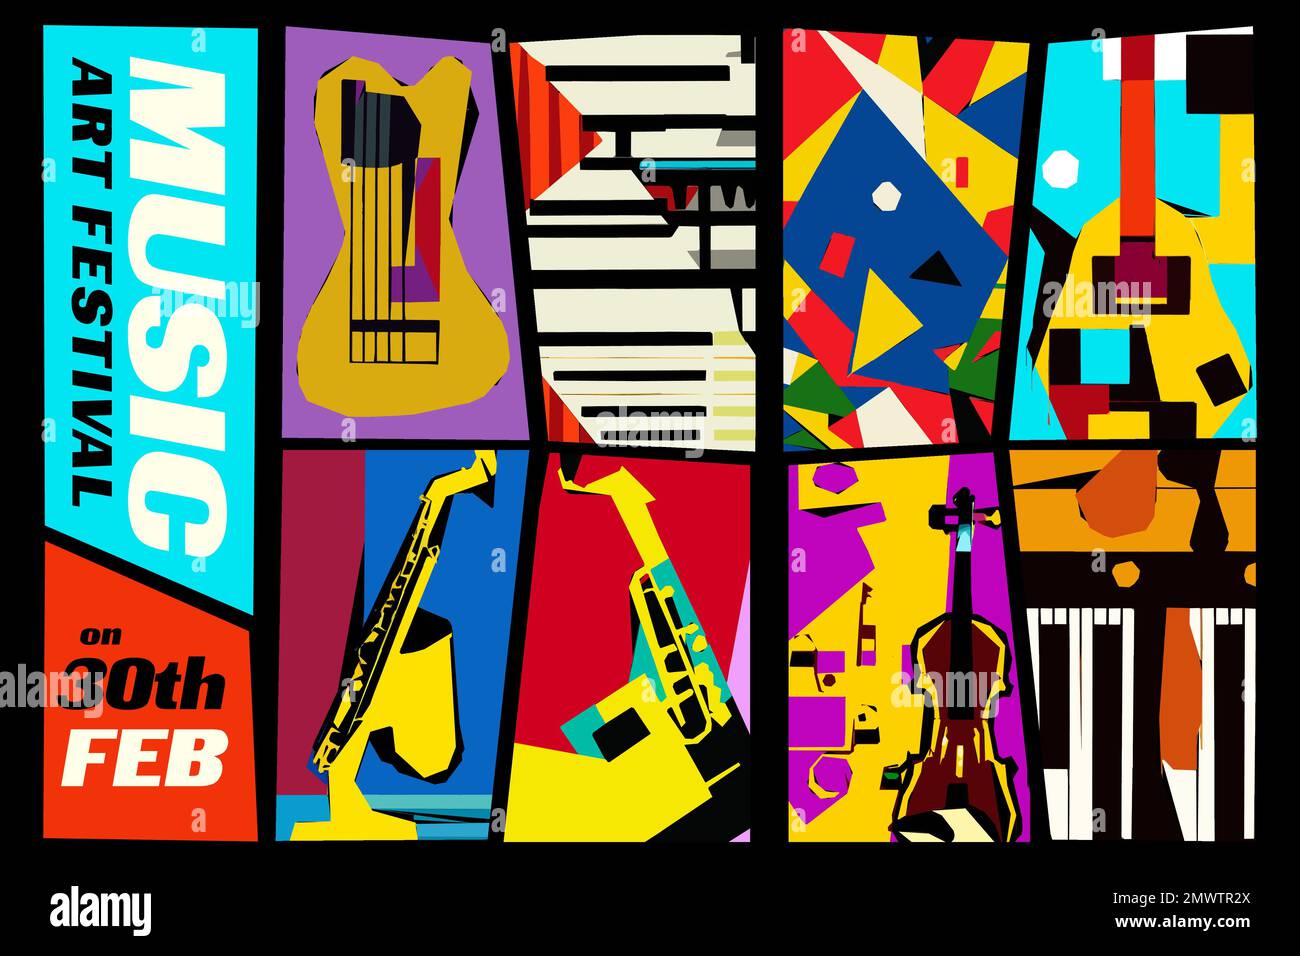 Music and Art Festival. Vector illustration of a set of abstract jazz backgrounds with musical instruments. Guitar, piano, saxophone and violin. Stock Vector